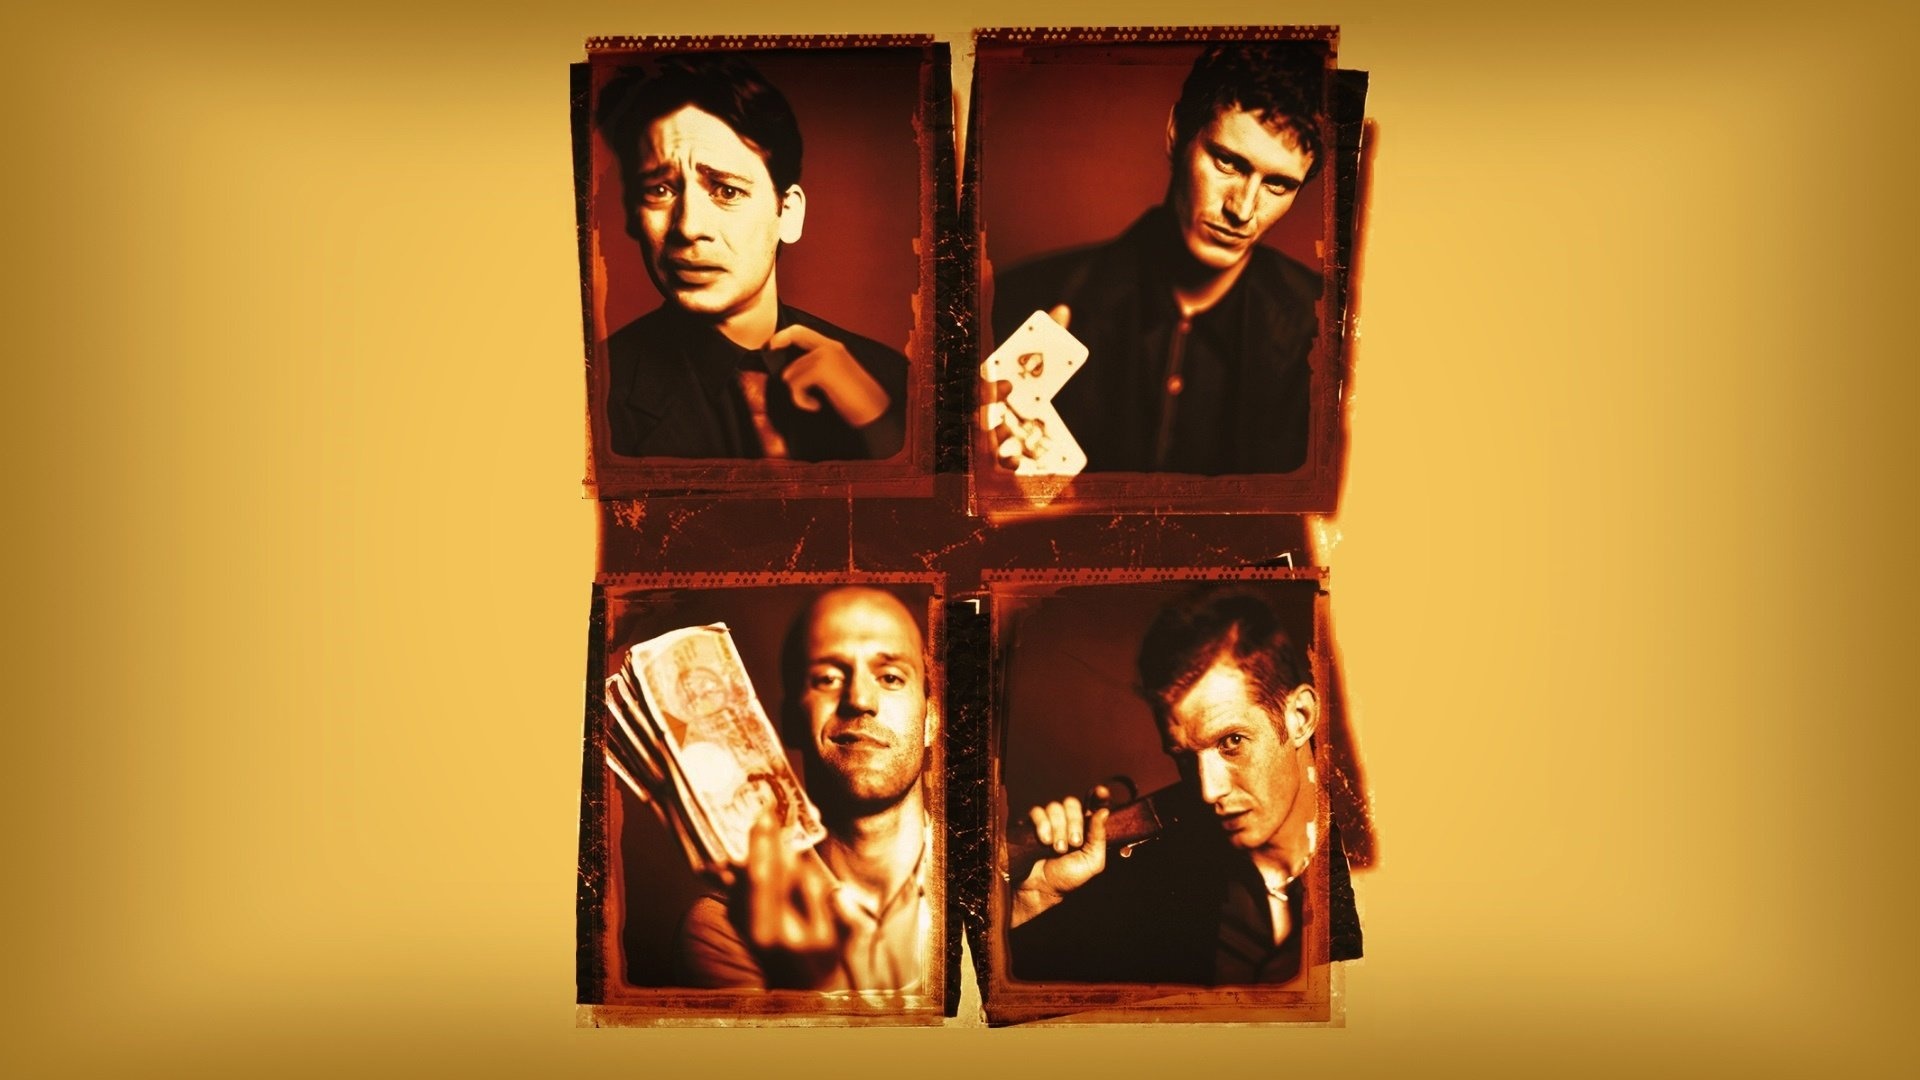 Lock, Stock and Two Smoking Barrels, British crime comedy, Guy Ritchie, Stylish visuals, 1920x1080 Full HD Desktop